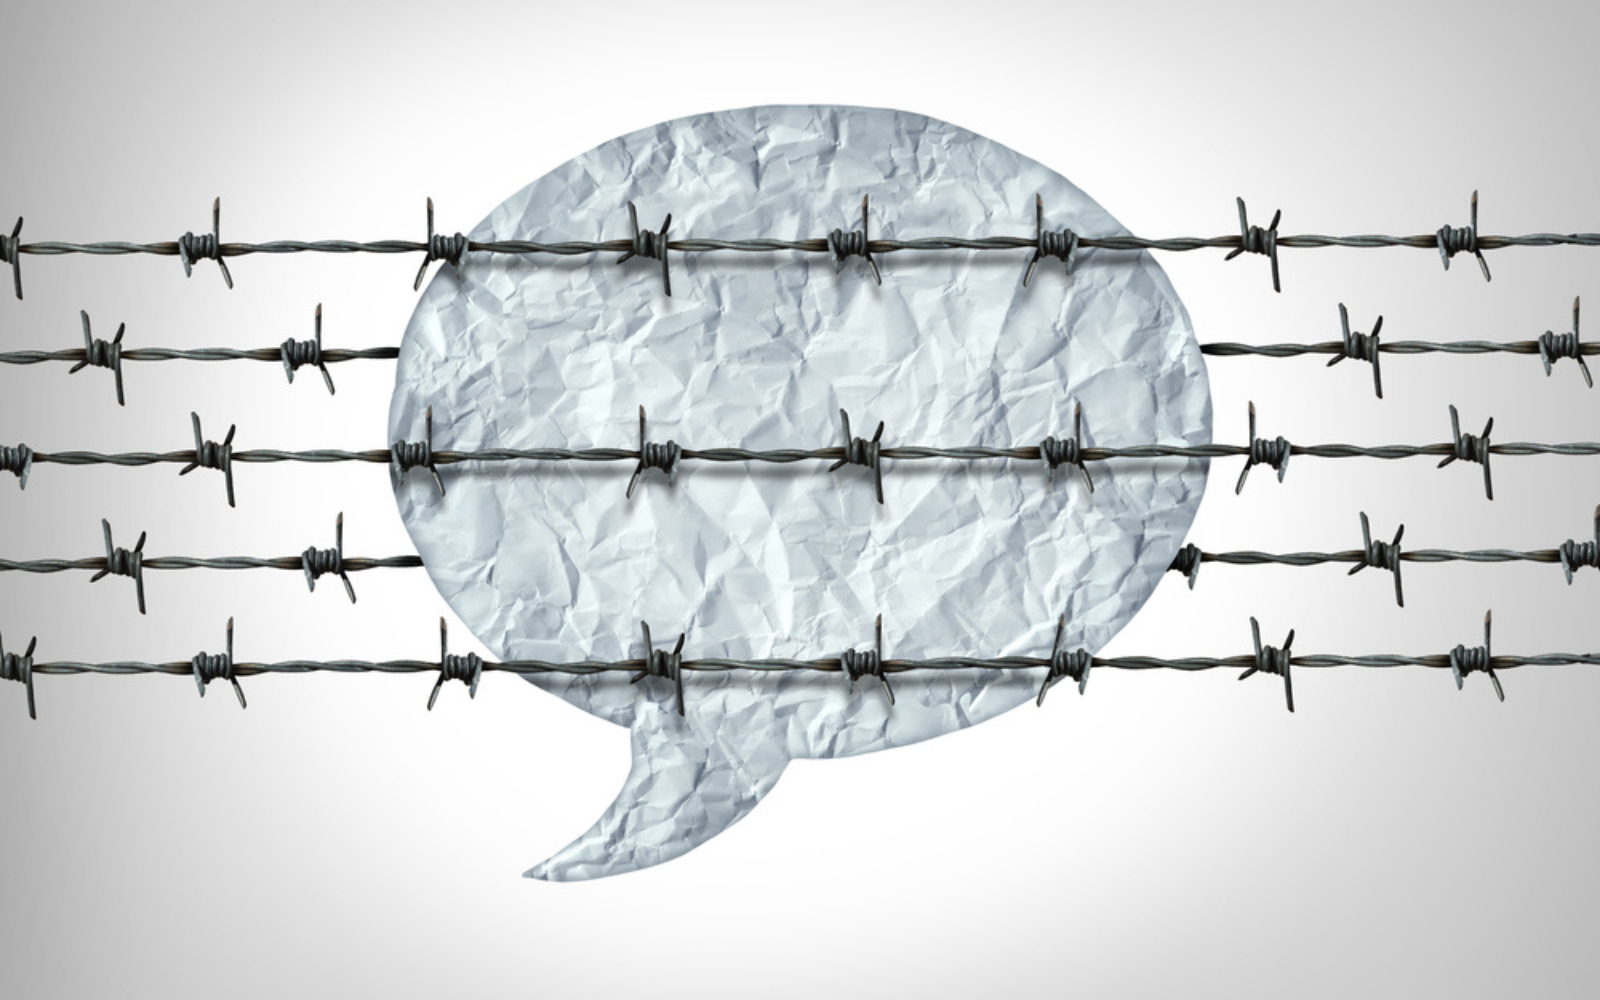 Social Media Freedom Of Speech: What Are The Limits?